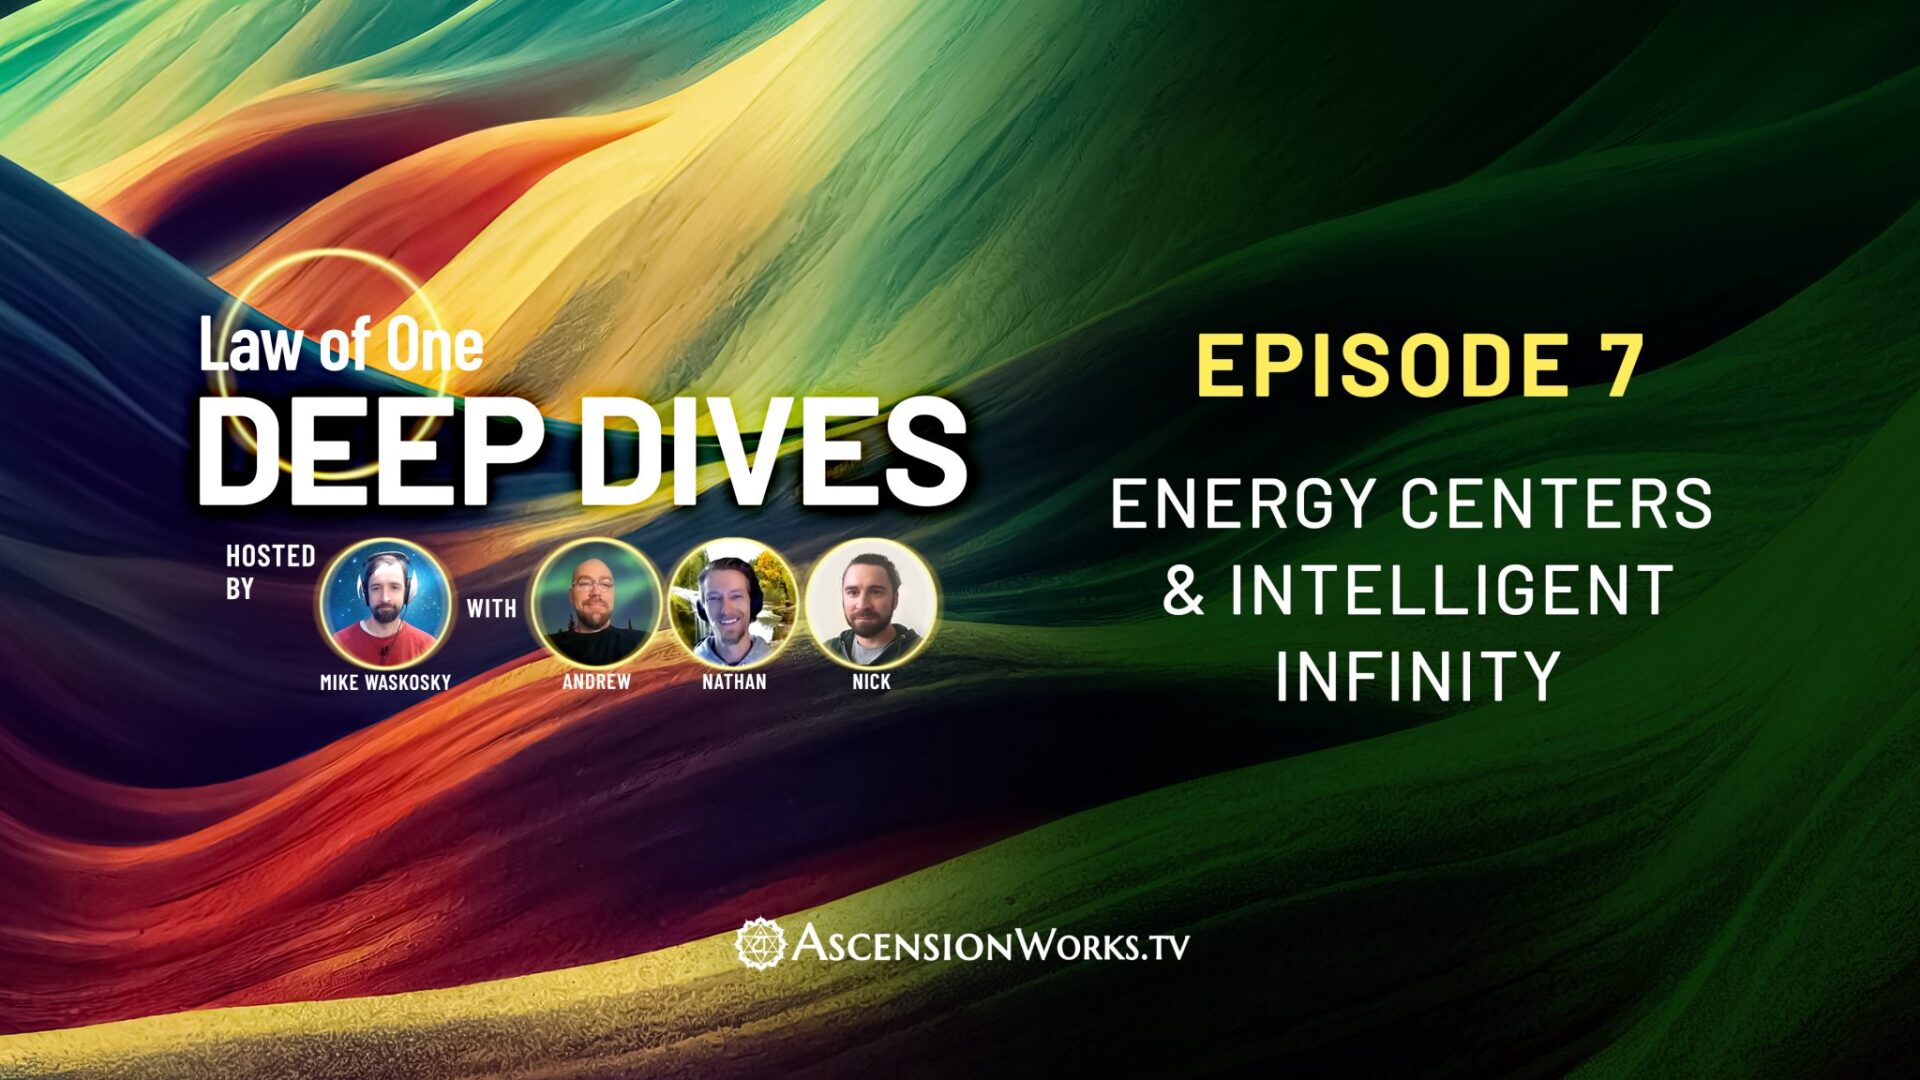 Law of One Deep Dives Episode 7: Energy Centers & Intelligent Infinity